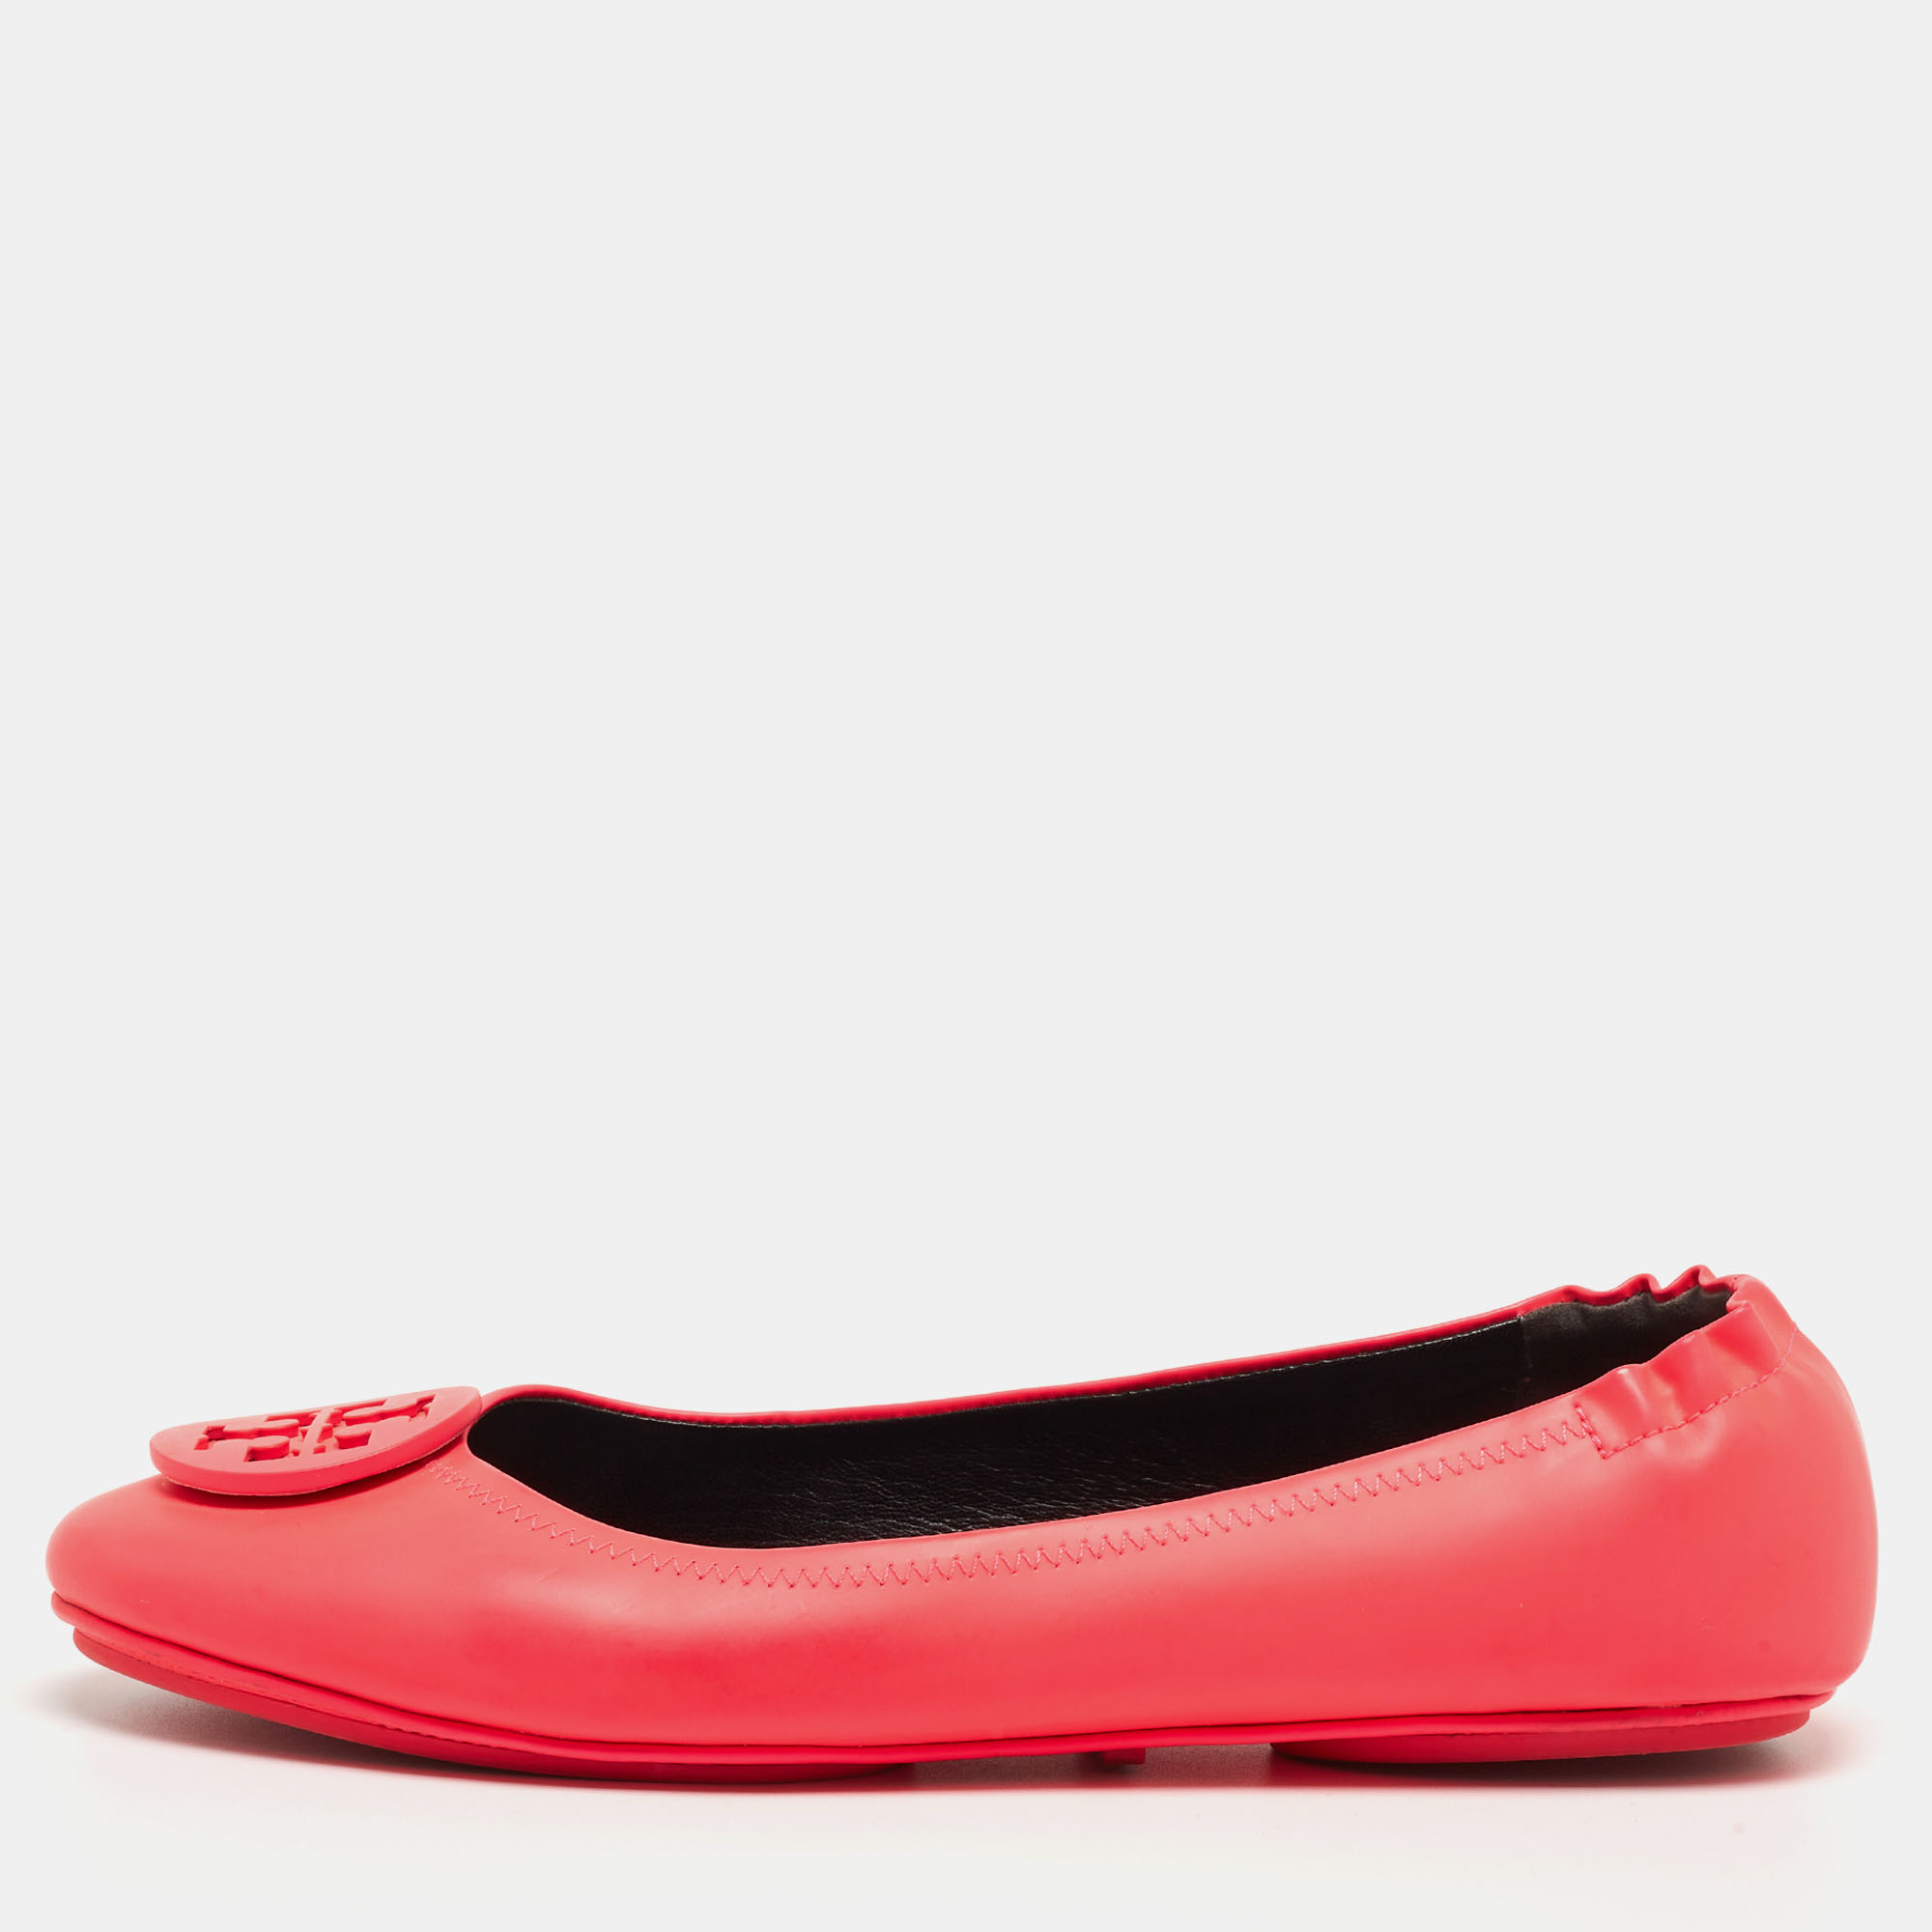 

Tory Burch Neon Pink Leather Reva Ballet Flats Size 40.5